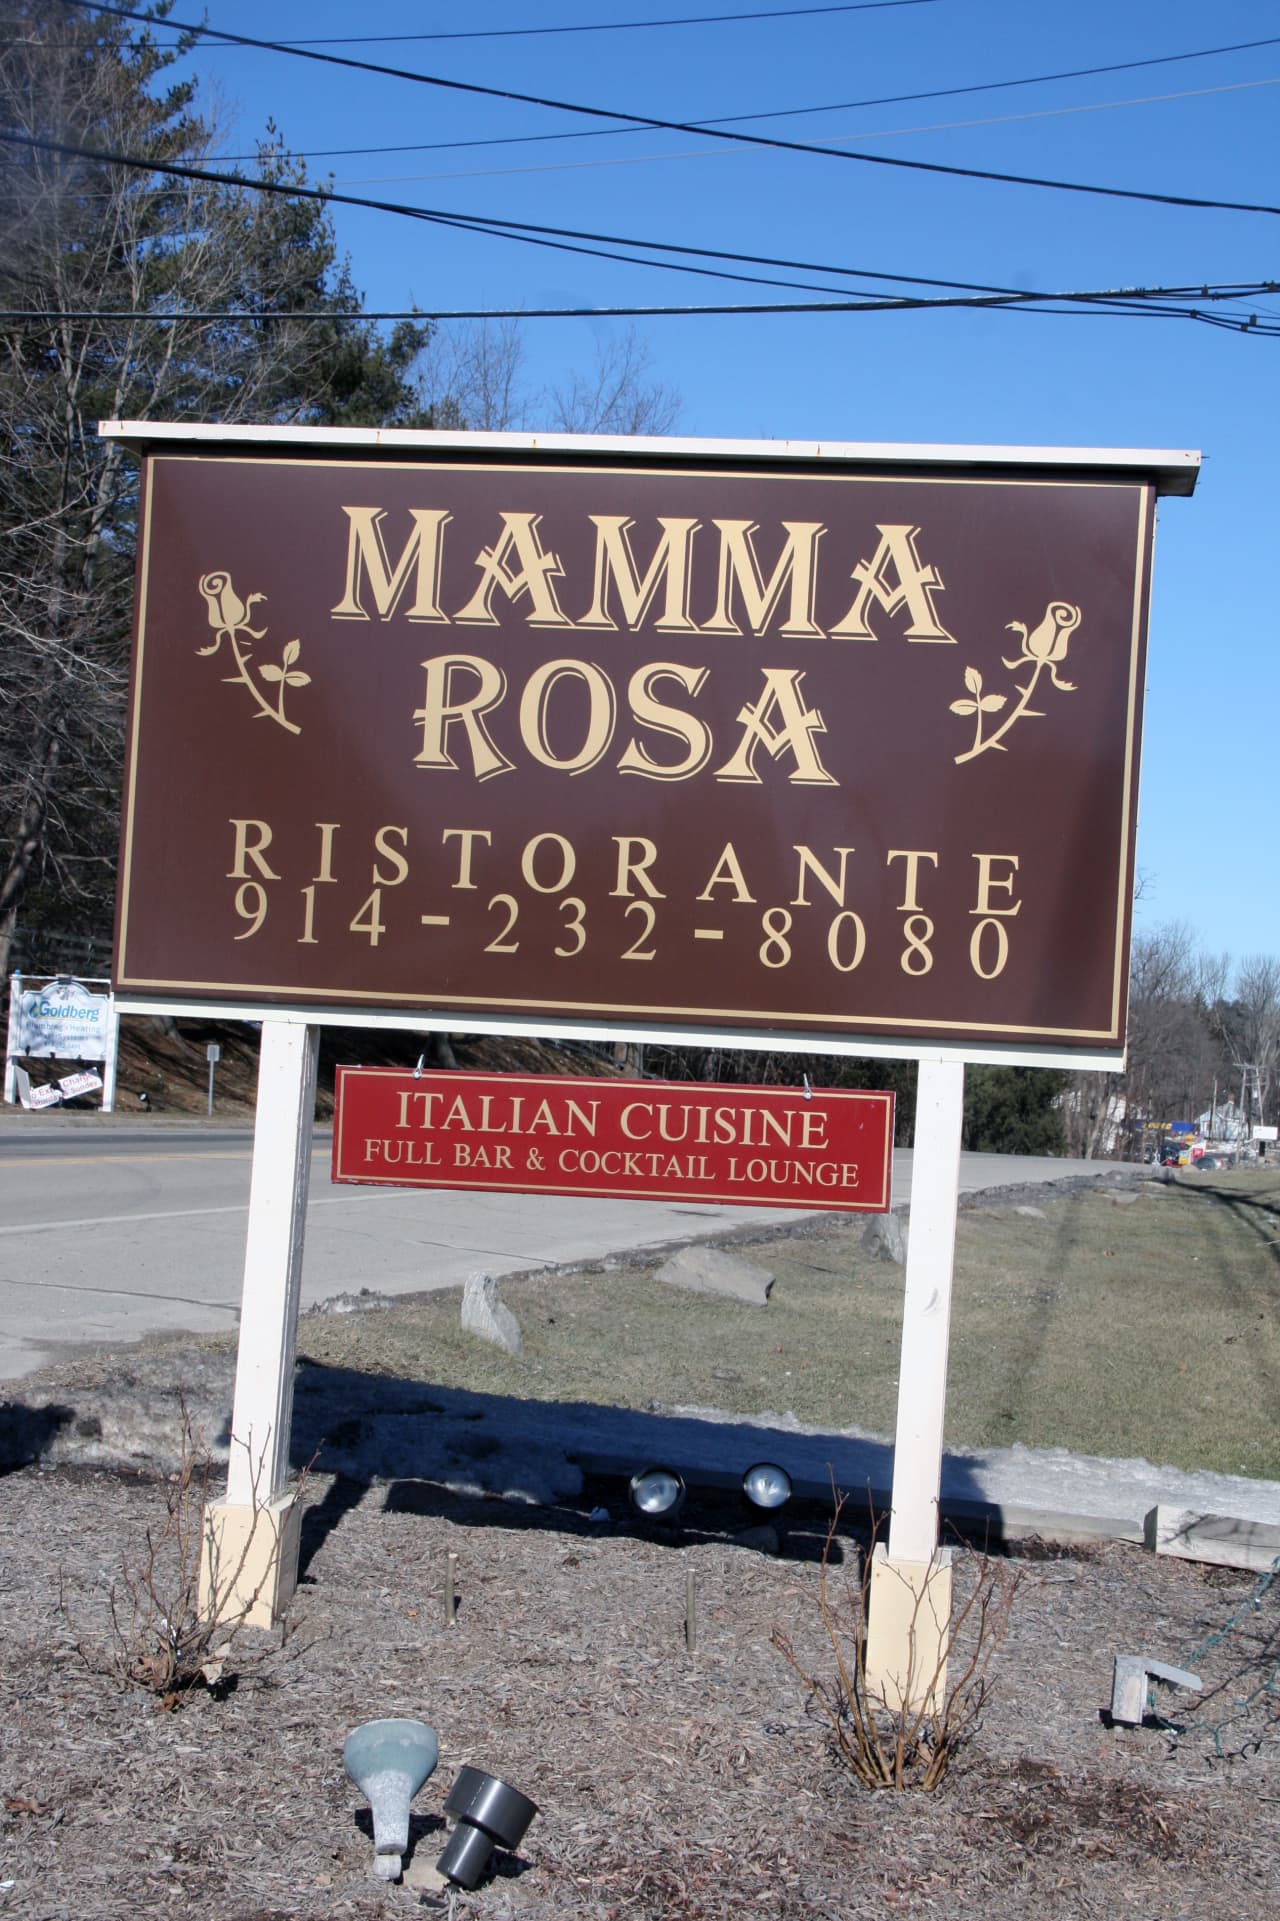 The North Salem Chamber of Commerce meets Tuesday at Mamma Rosa.